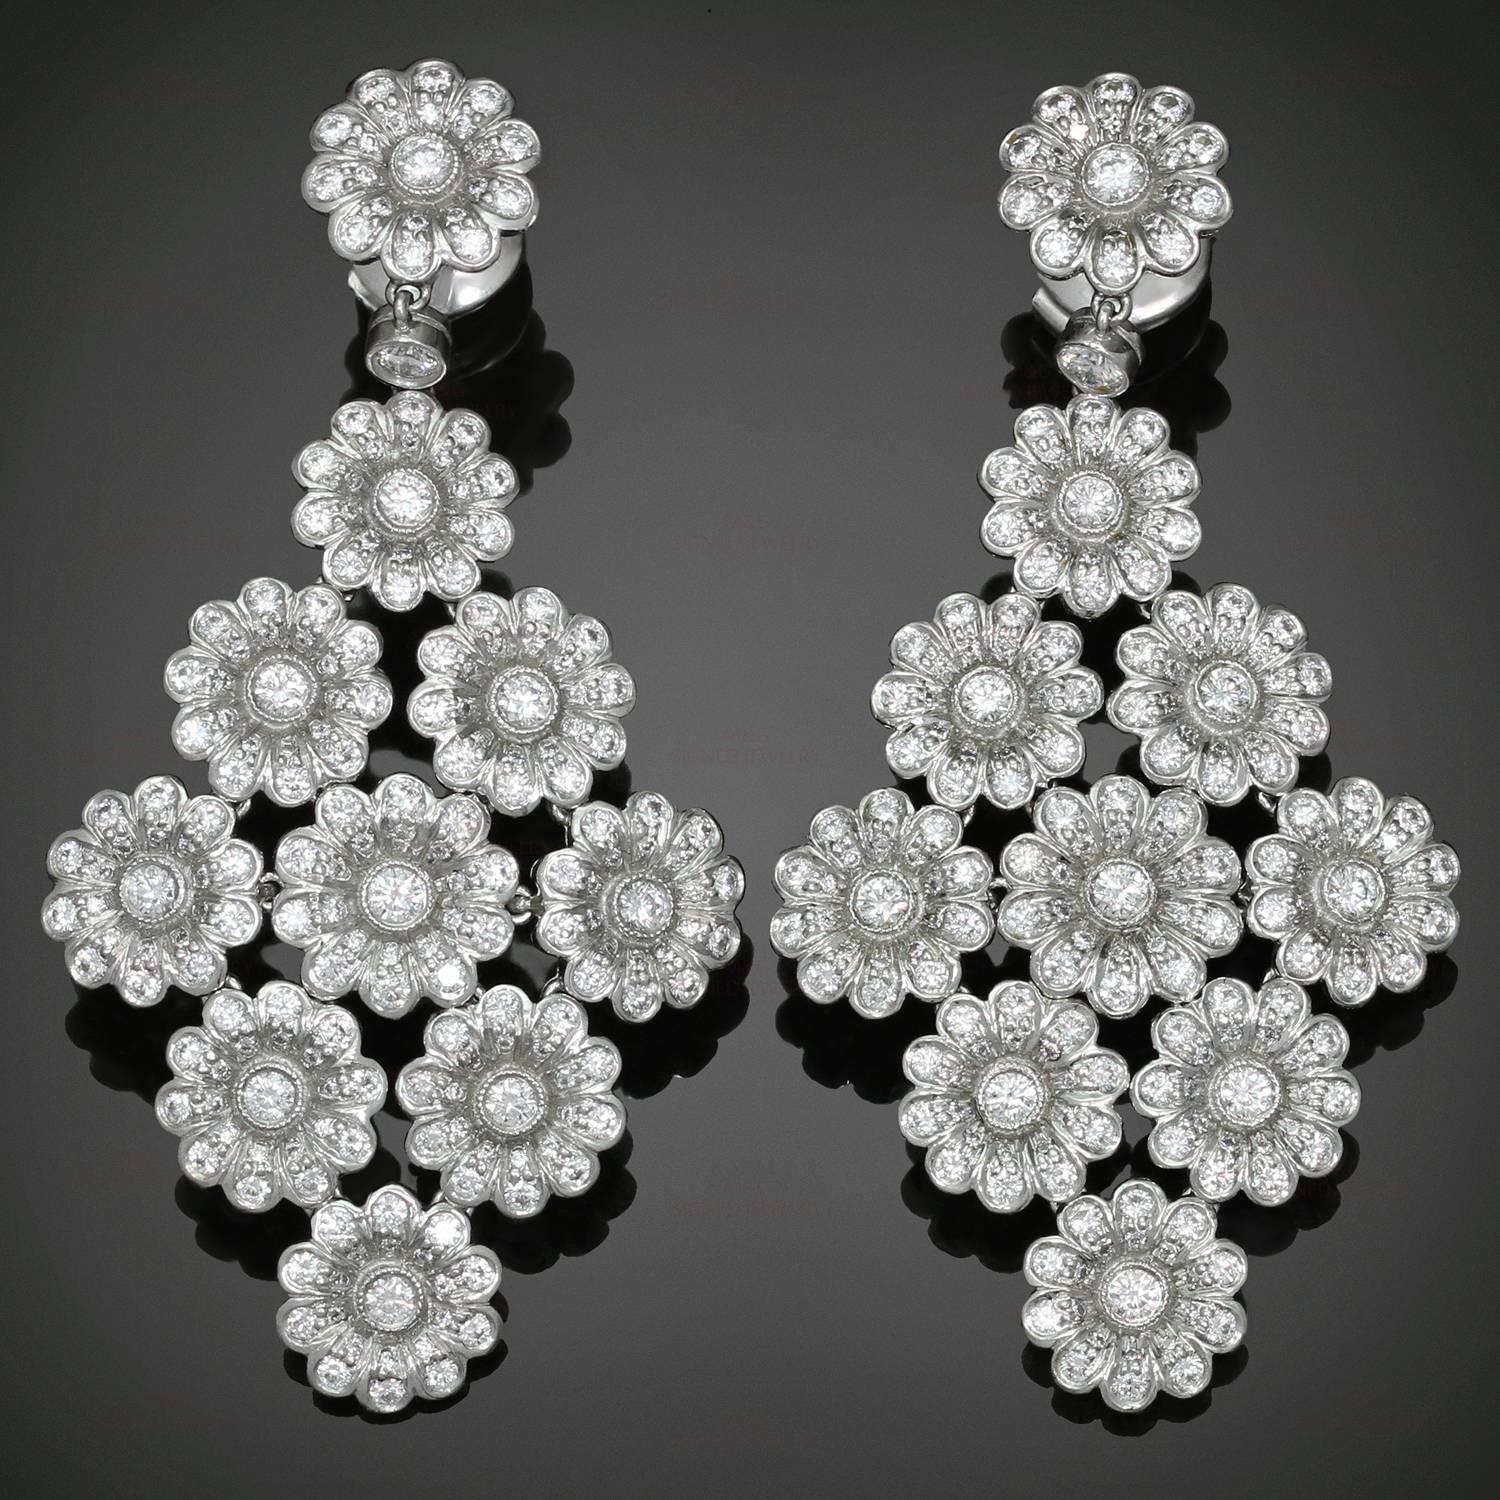 These elegant floral earrings from Tiffany’s exquisite Rose collection are crafted in platinum and set with brilliant-cut round diamonds of an estimated 4.0 carats. Made in United States circa 2000s. Measurements: 1.06